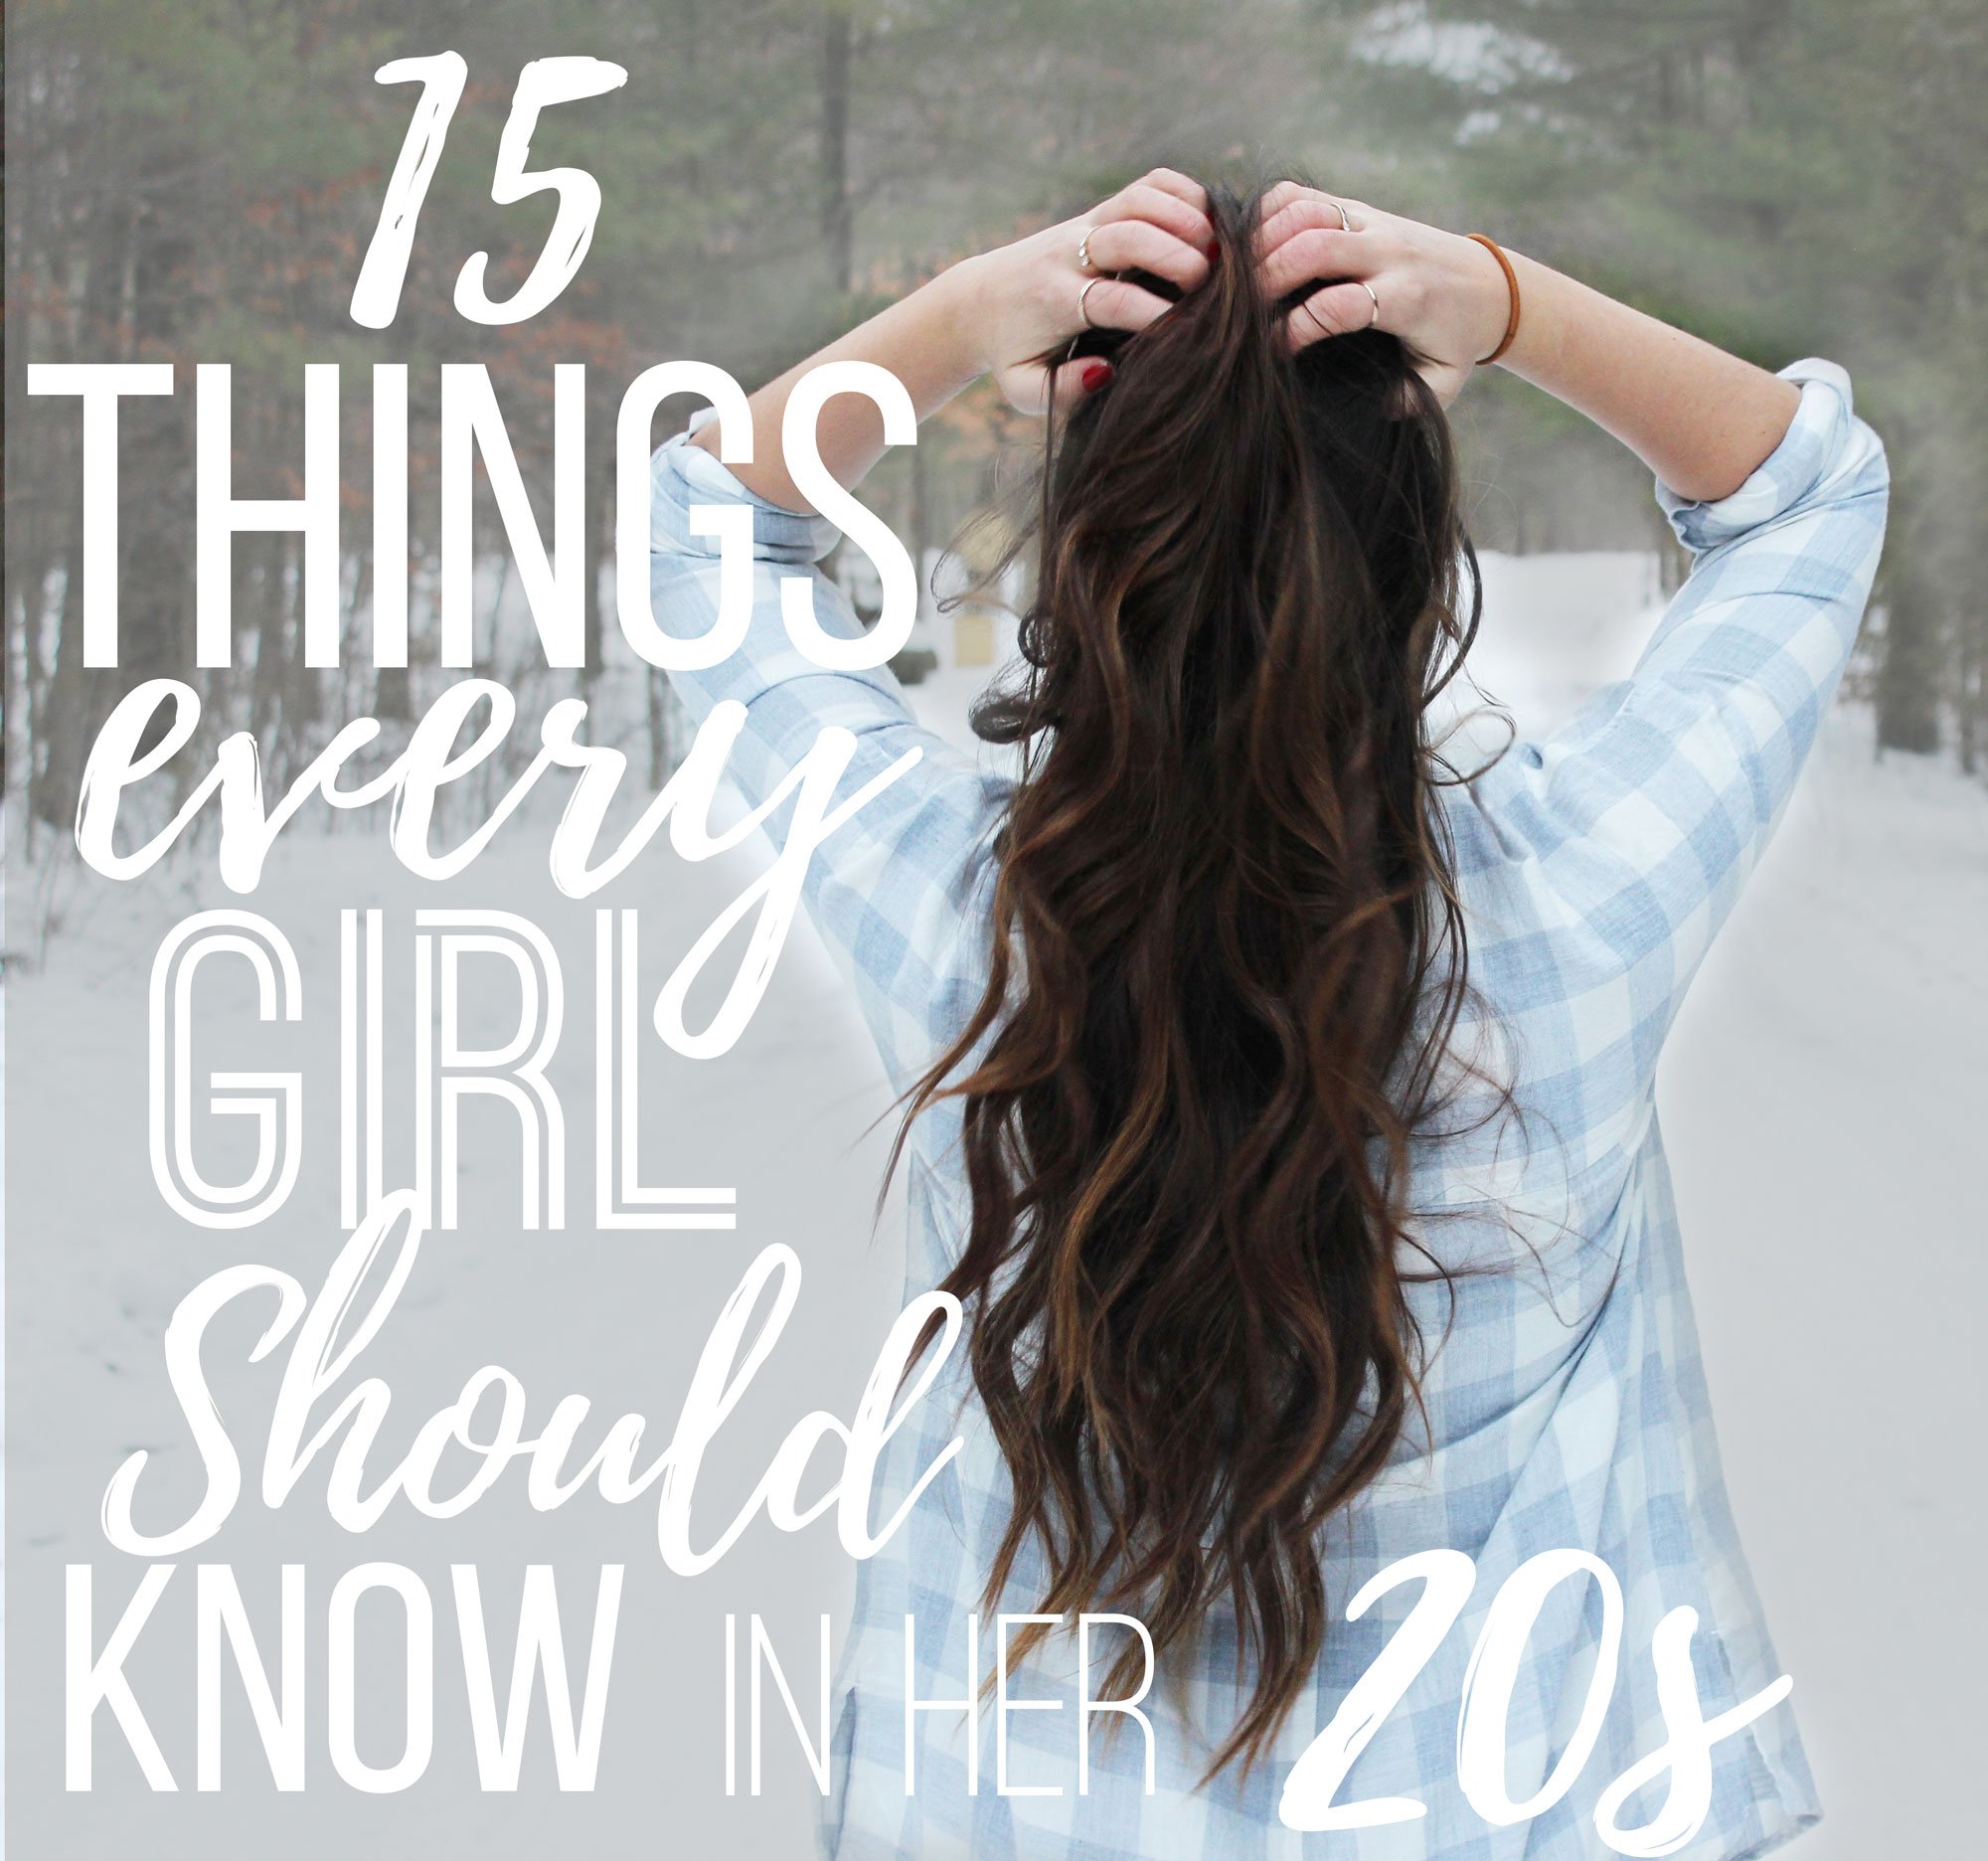 15 Things Every Girl Should Know In Her 20s